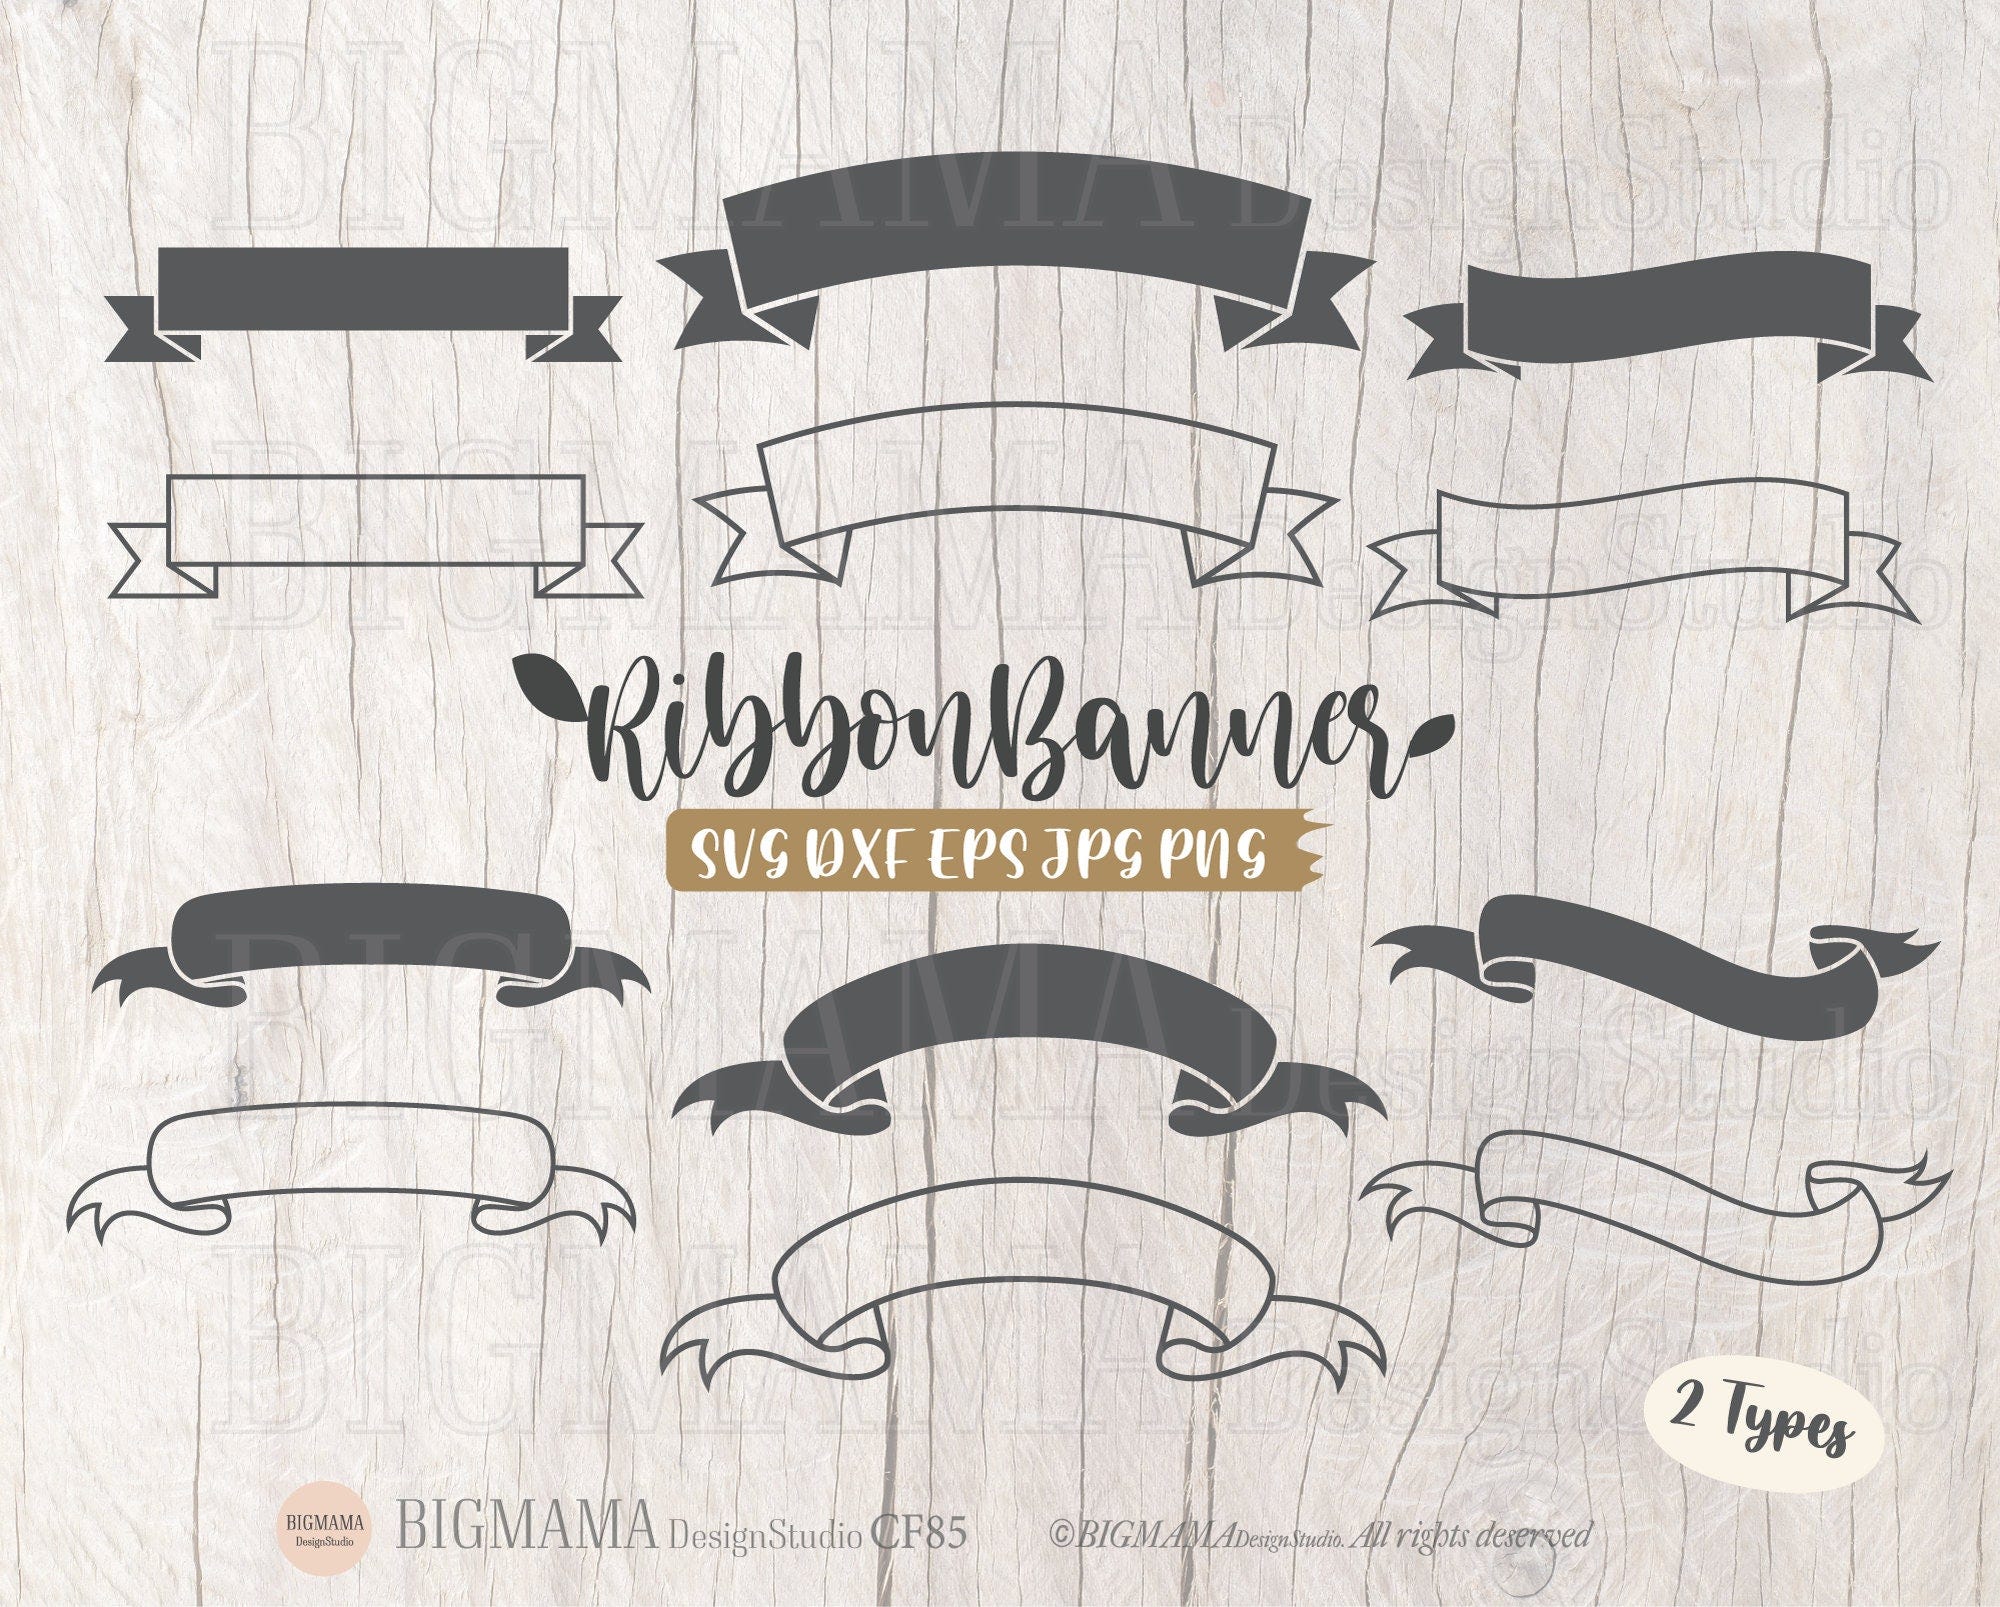 Ribbon Banner SVG,Frame DXF,Label,Scroll,Cut File,PNG,Cricut,Silhouette,Commercial use,Instant download_CF85